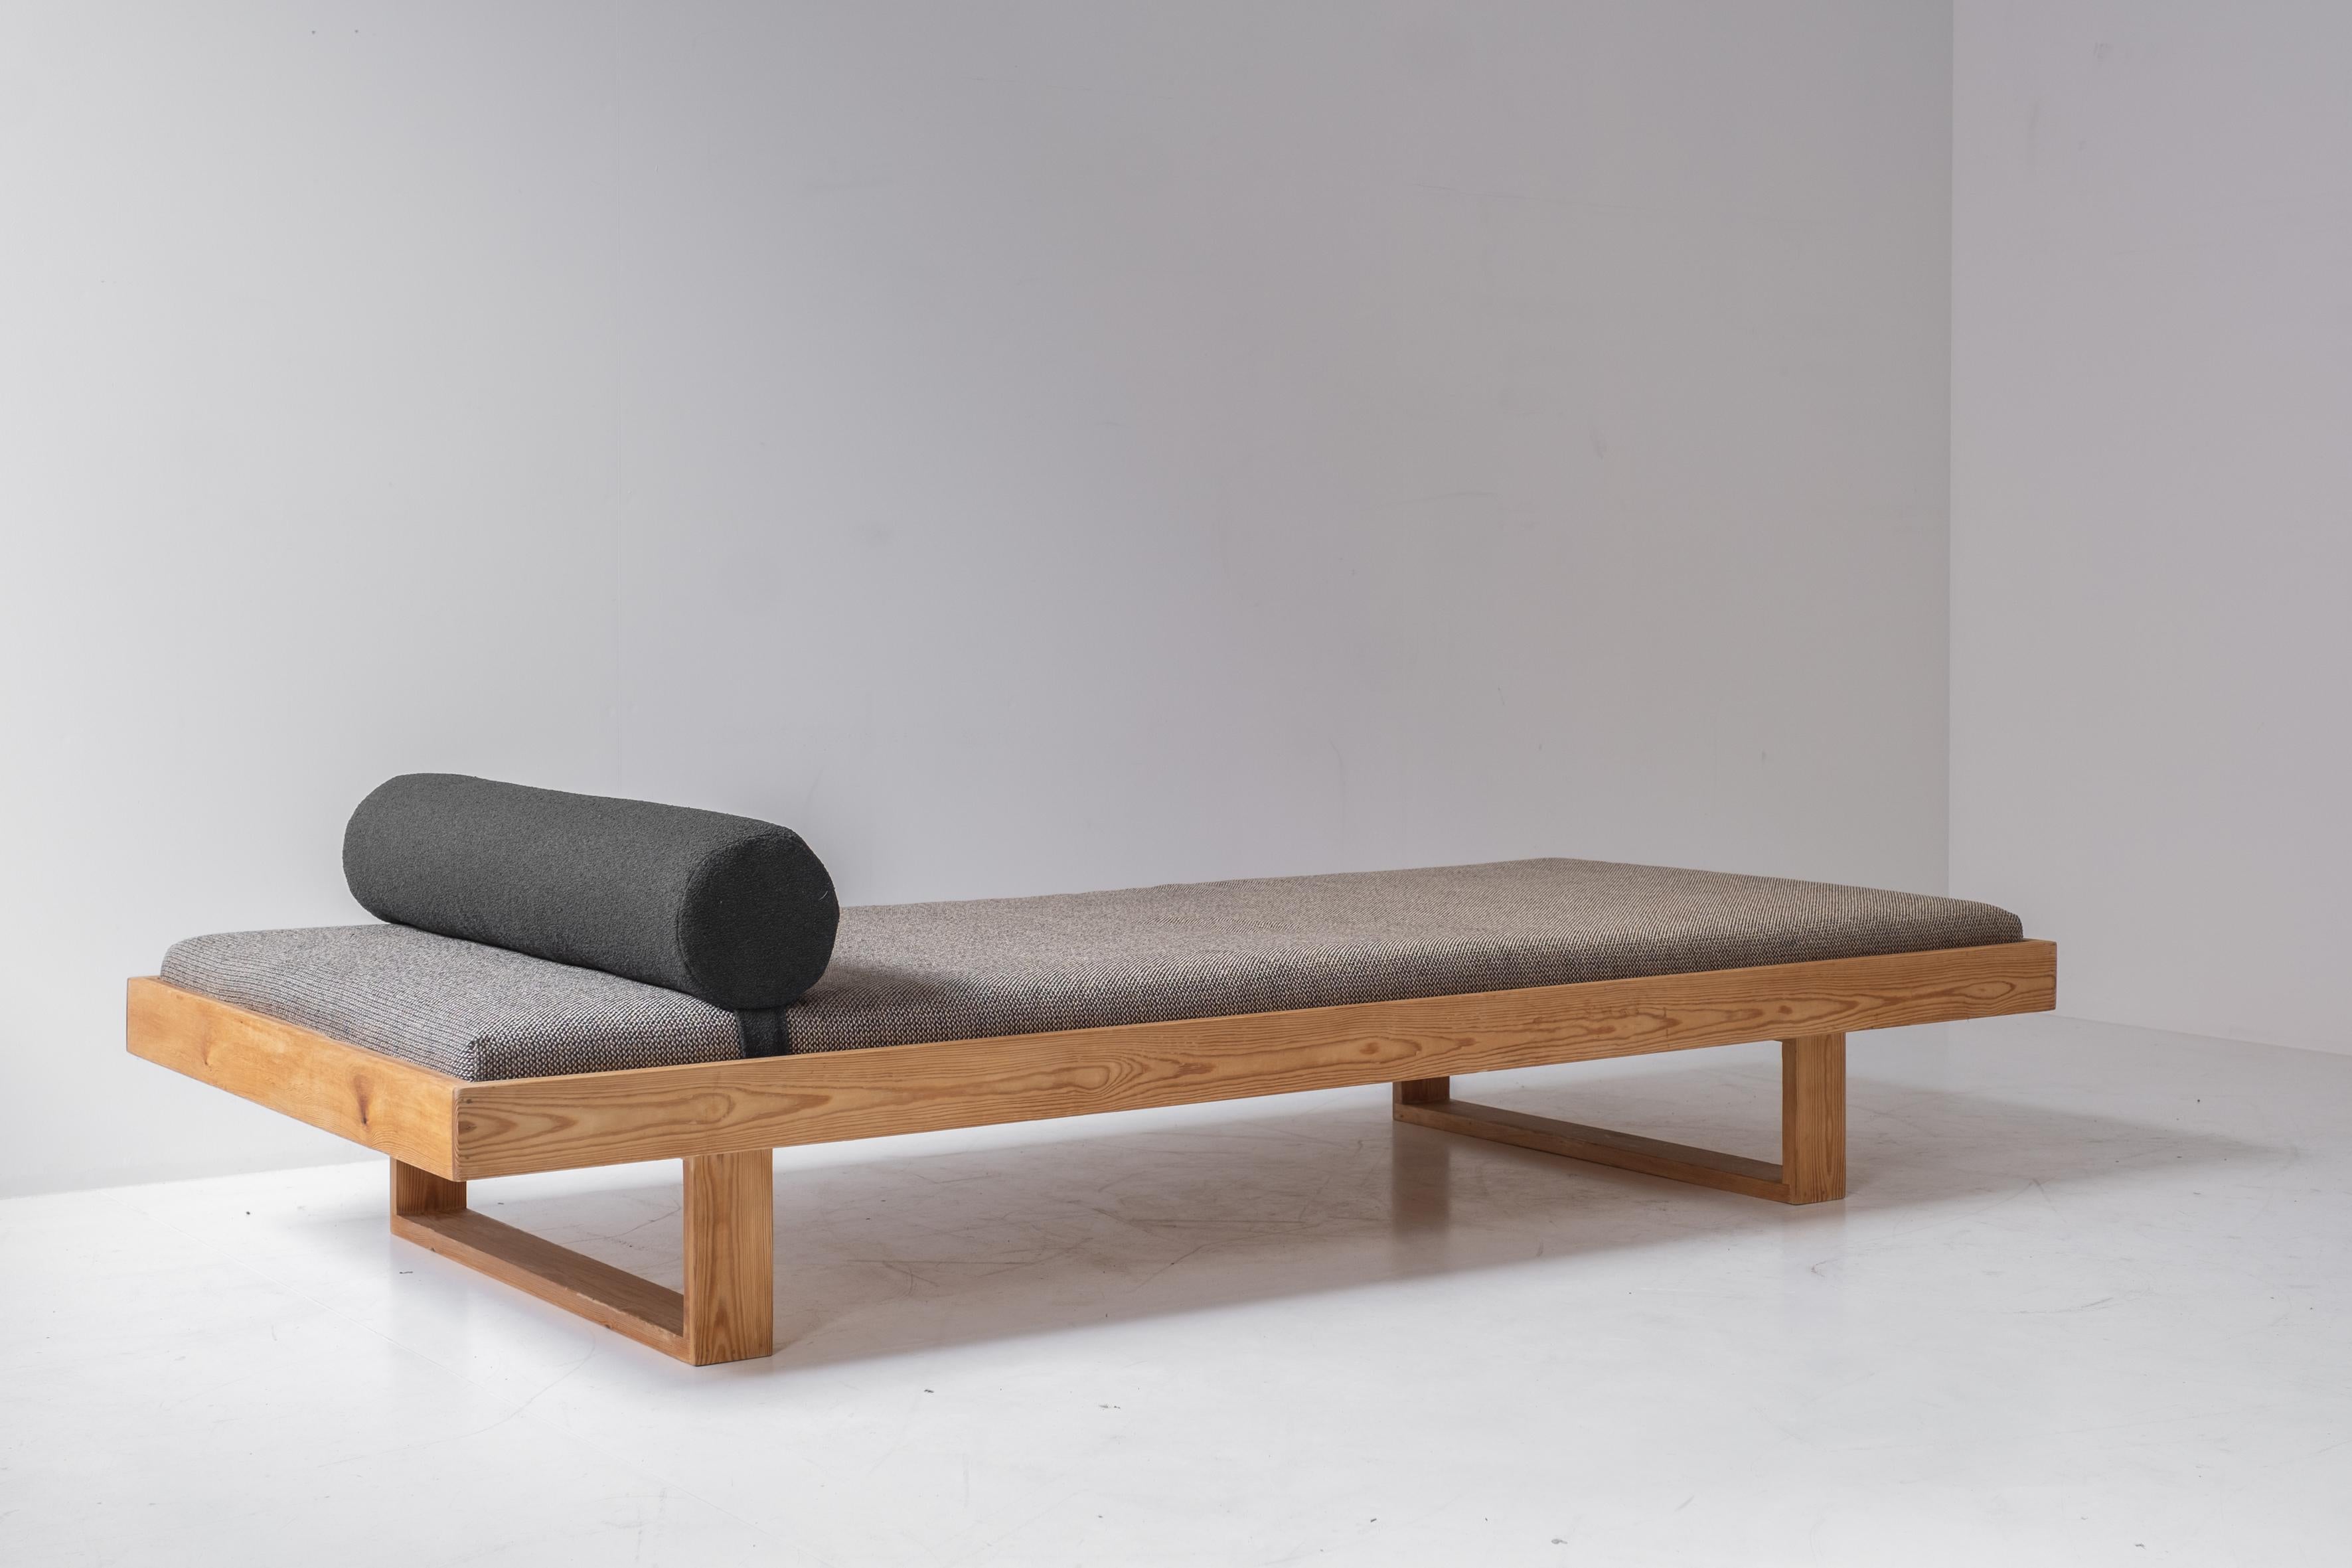 Lovely daybed in pine from Denmark, dating from the 1960s. This piece features a pine frame with freshly re-upholsterd seat and neck roll. Restored with love. In the manner of Charlotte Perriand VS Ate van Apeldoorn.